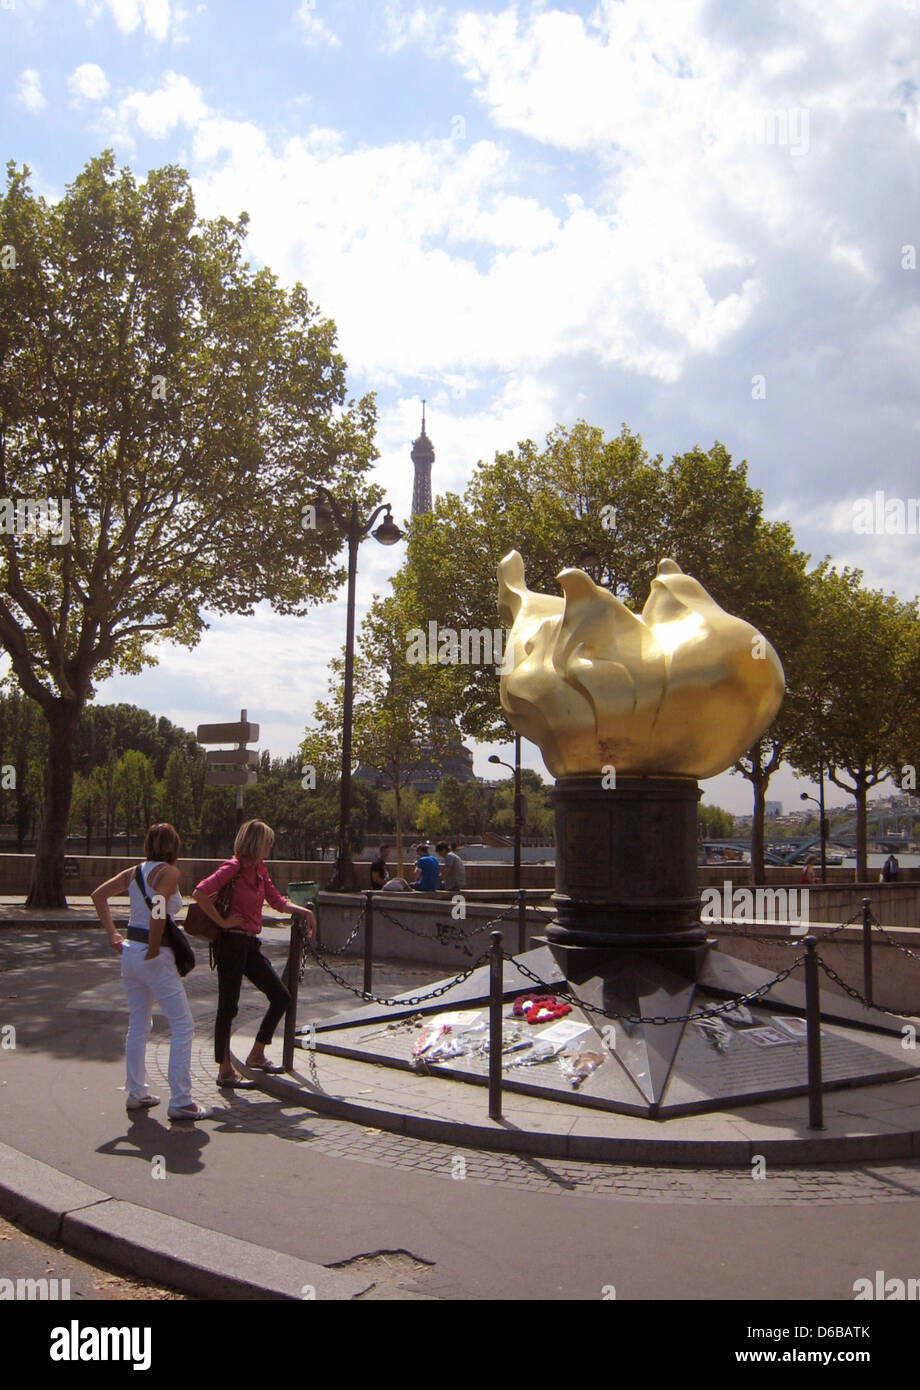 Tourists stand at the flame sculpture at the enntrance to the Pont de l'Alma tunnel, where Princess Diana died in a car accident on 31 August 1997, in Paris, France, 23 August 2012. The replica of the flame of the Statue of Liberty will be used as the location for the commemration of Diana. Photo: Benjamin Wehrmann Stock Photo